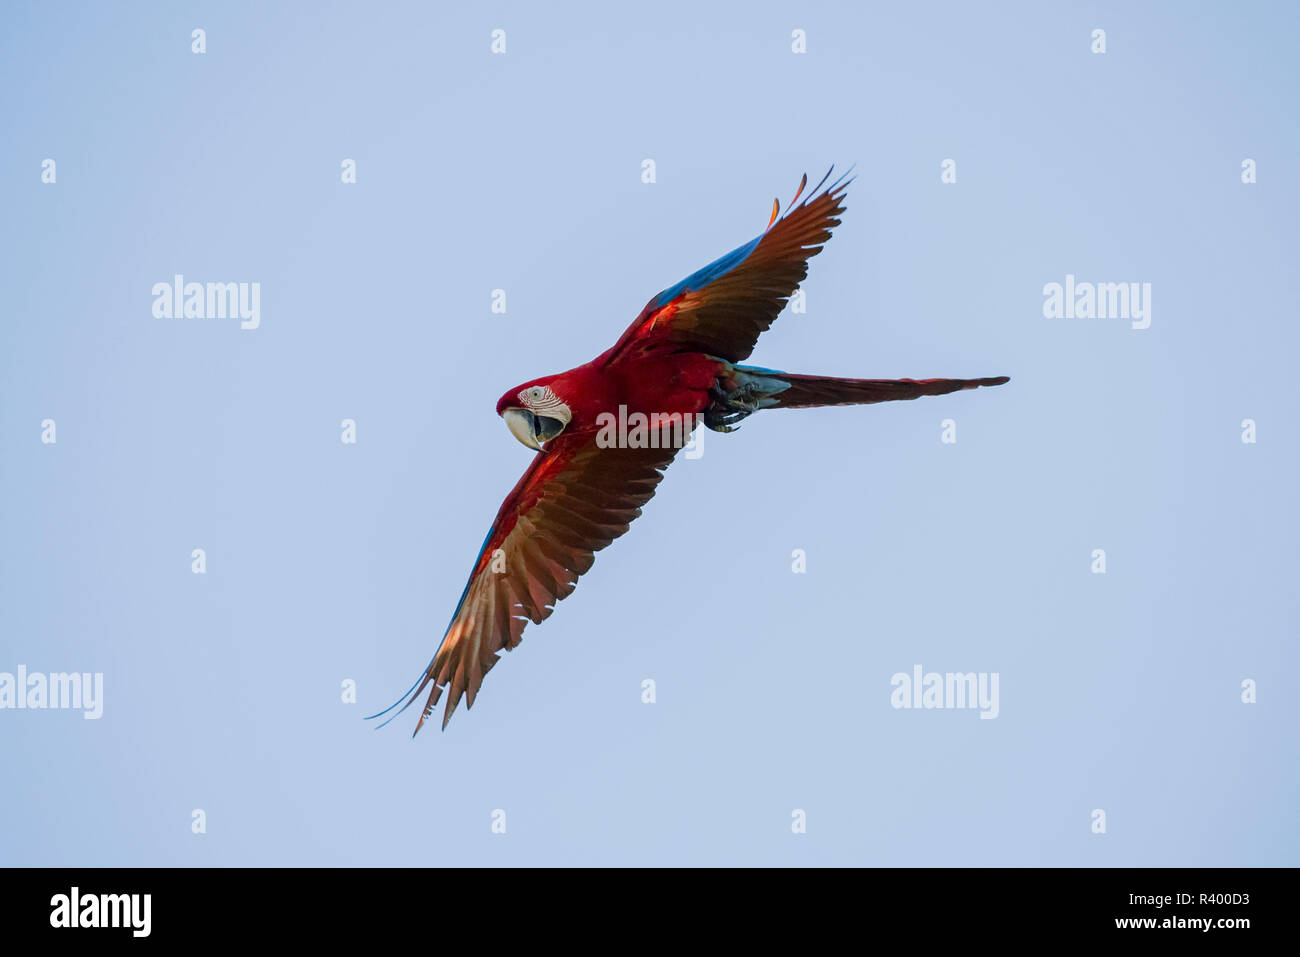 Red-and-green macaw (Ara chloropterus) in flight, Pantanal, Mato Grosso do Sul, Brazil Stock Photo